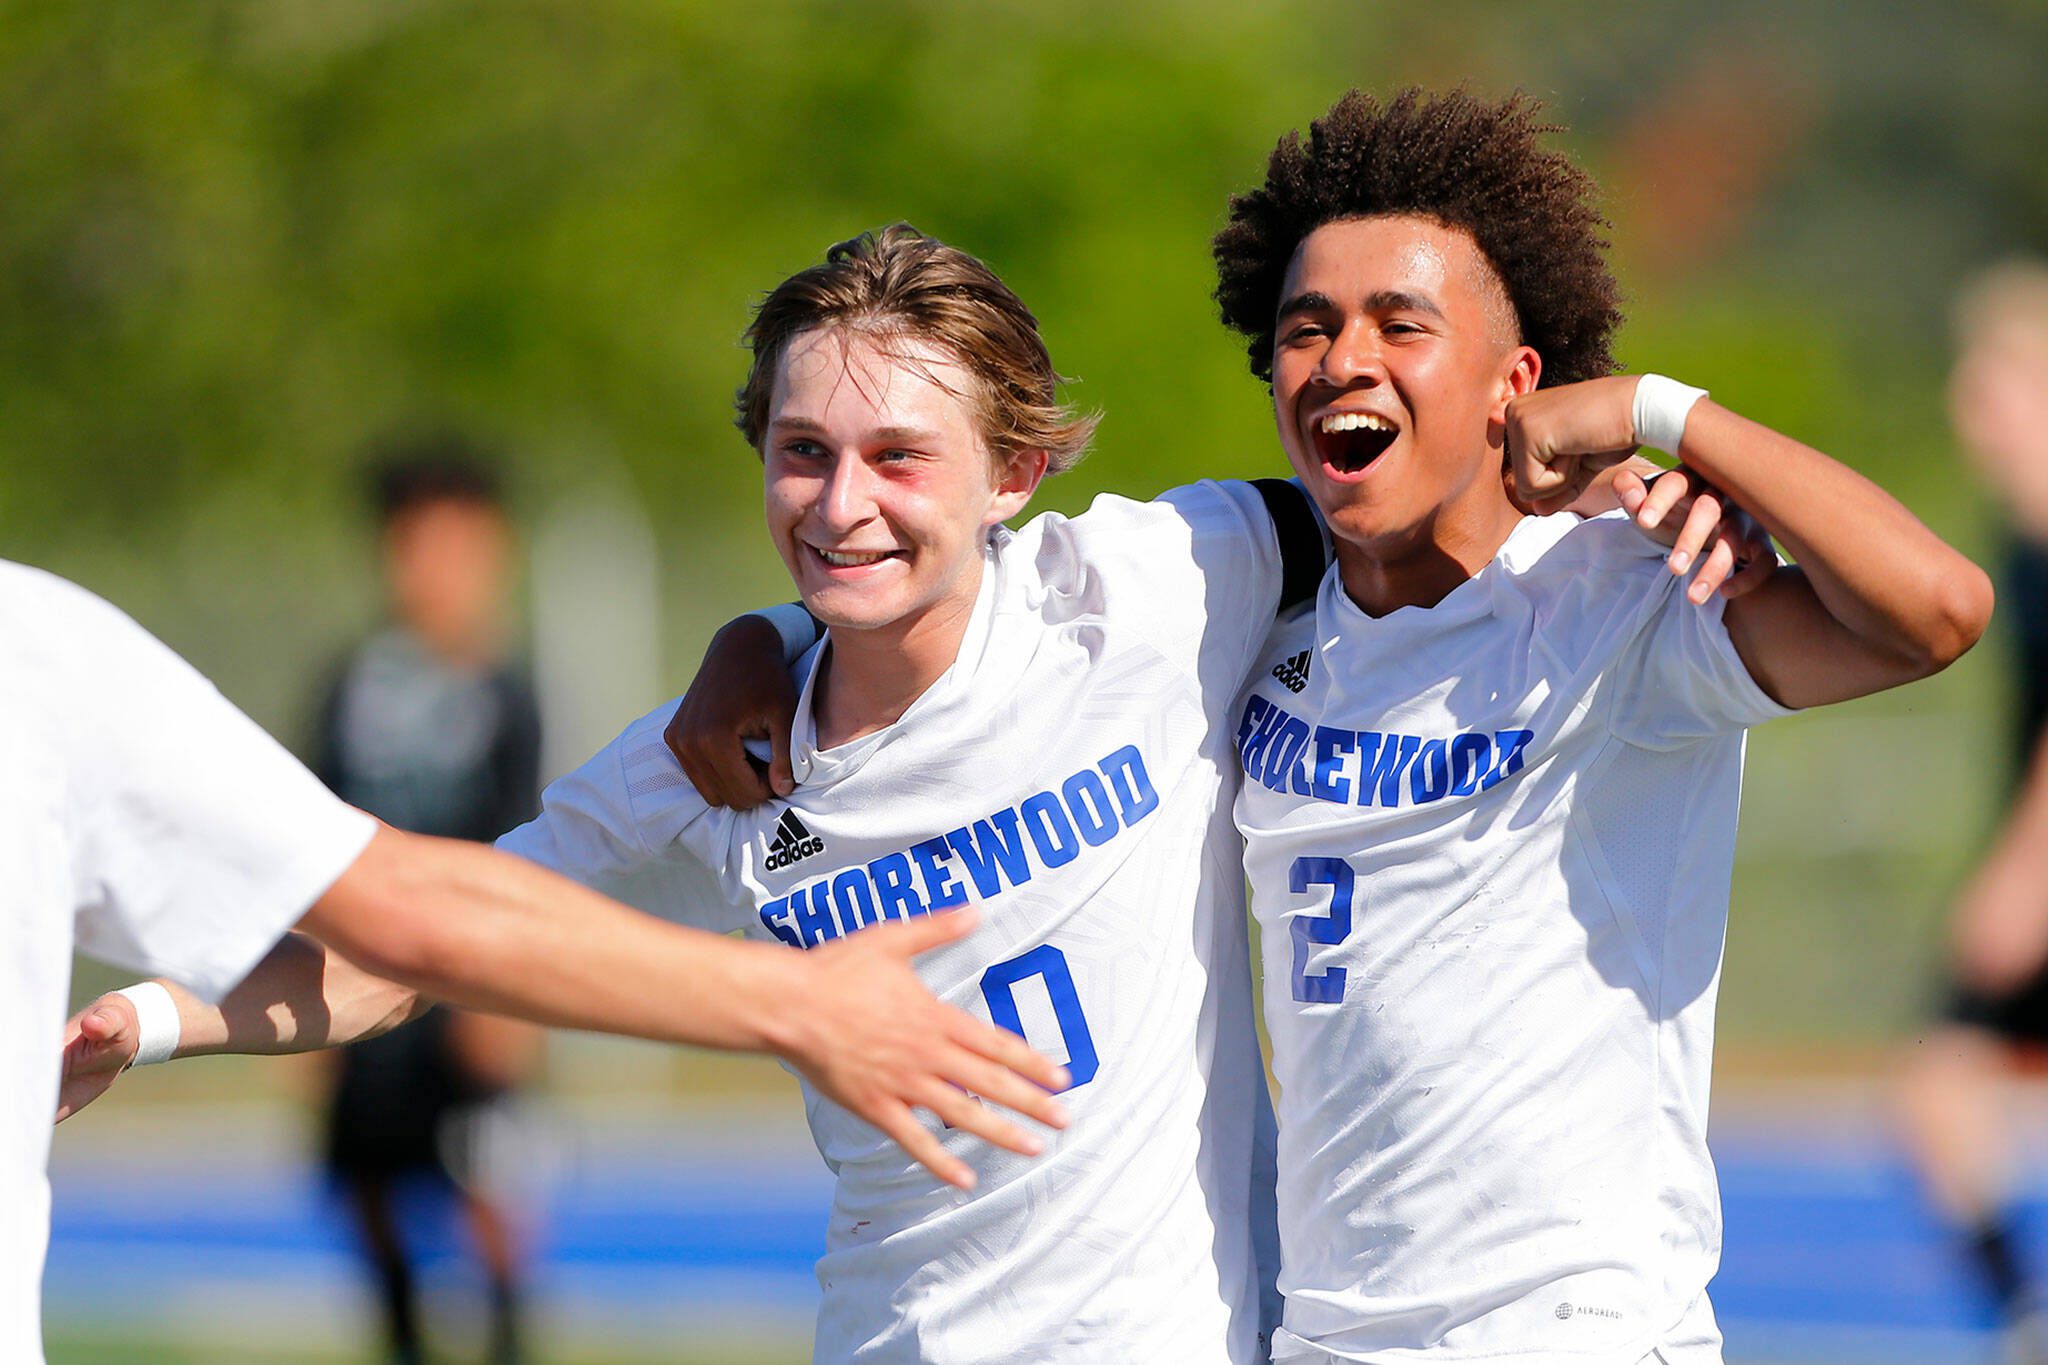 Shorewood midfielder Dzanan Fikic and attacker Jackson Smith celebrate a second team goal in the waning minutes of their Class 3A District 1 championship victory over Mount Vernon on Saturday at Shoreline Stadium in Shoreline. (Ryan Berry / The Herald)